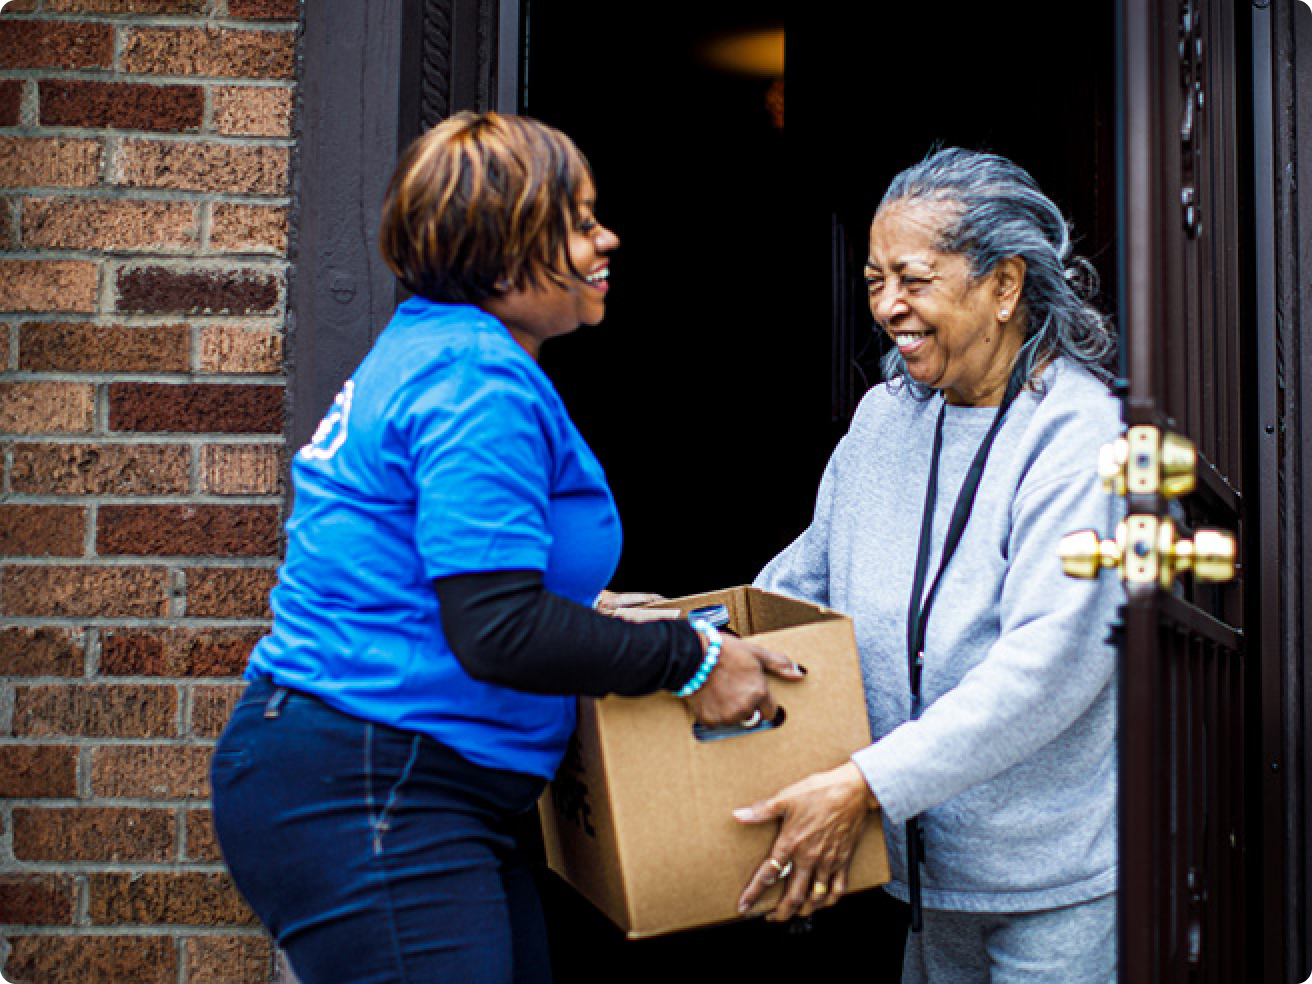 A volunteer giving a box of donations to another person